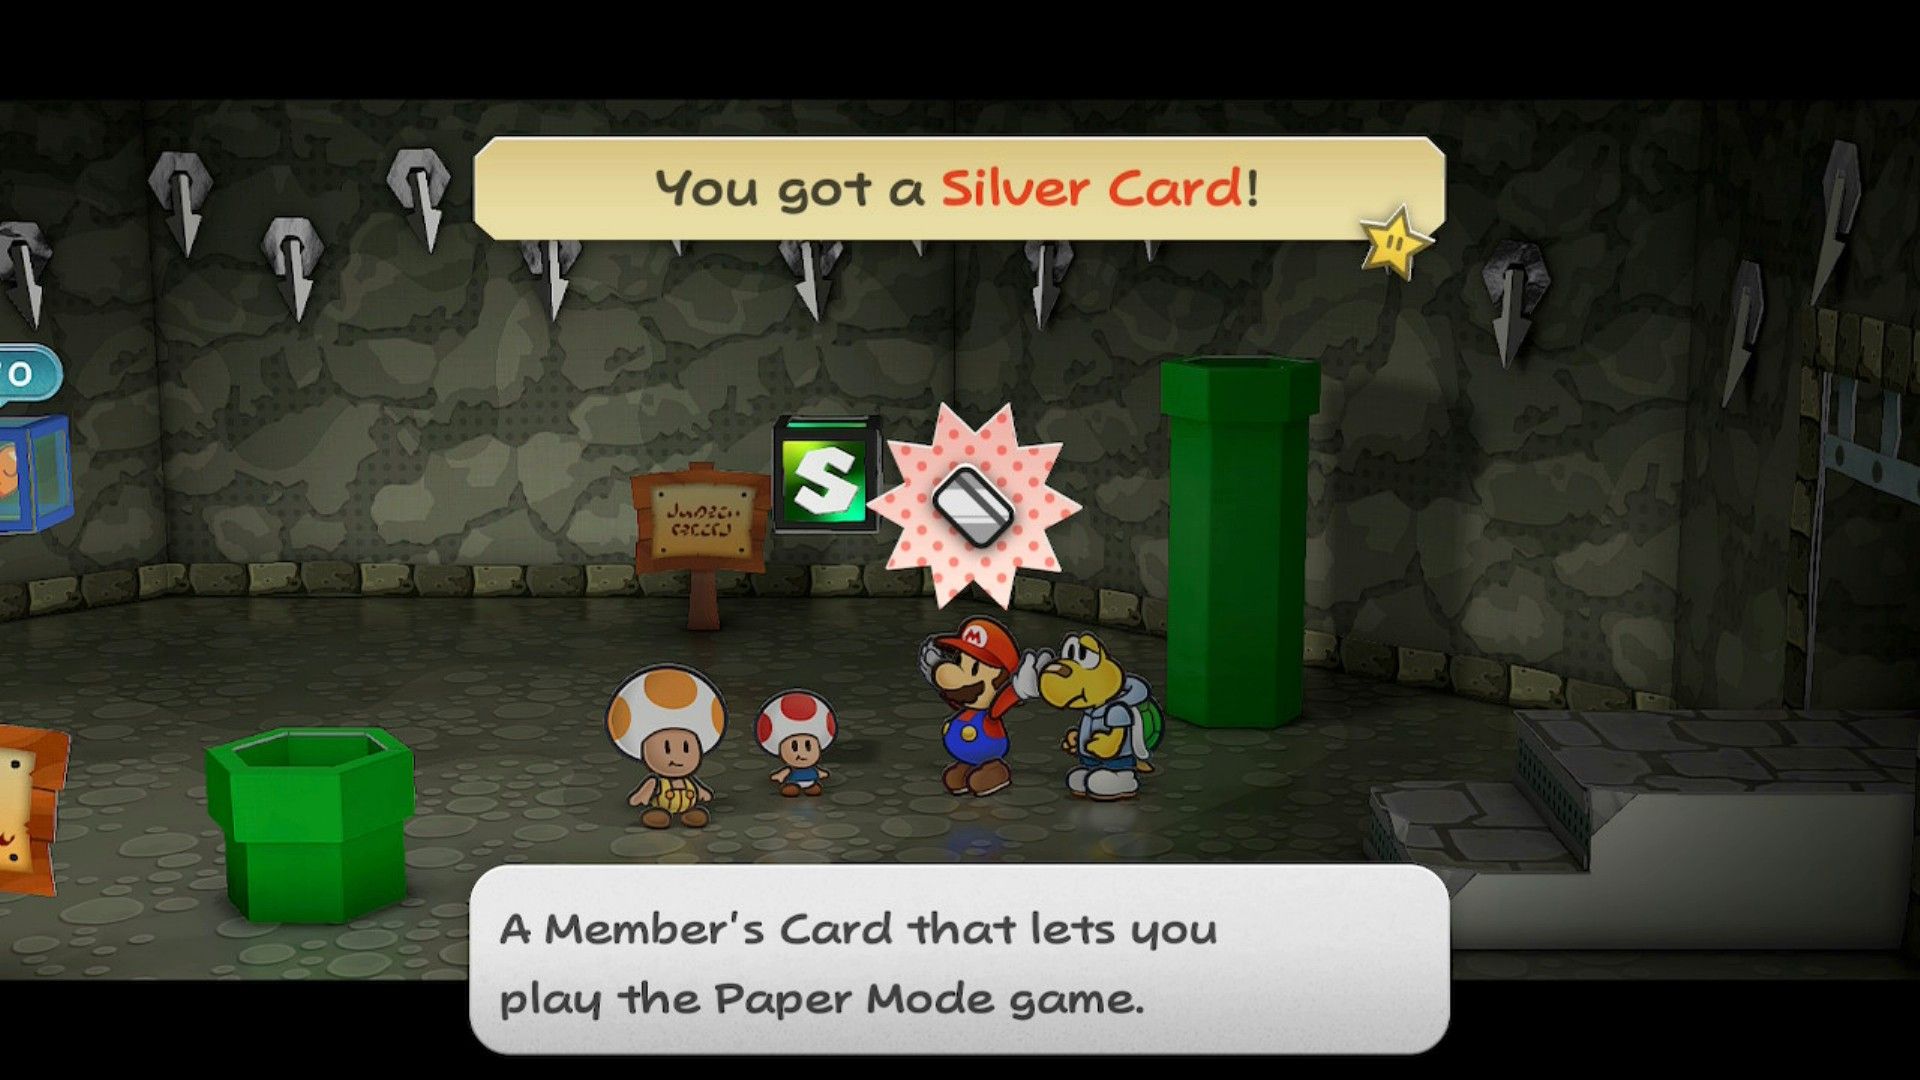 Paper Mario: The Thousand-Year Door - Pit of 100 Trials, Pine T. Jr. Silver Card